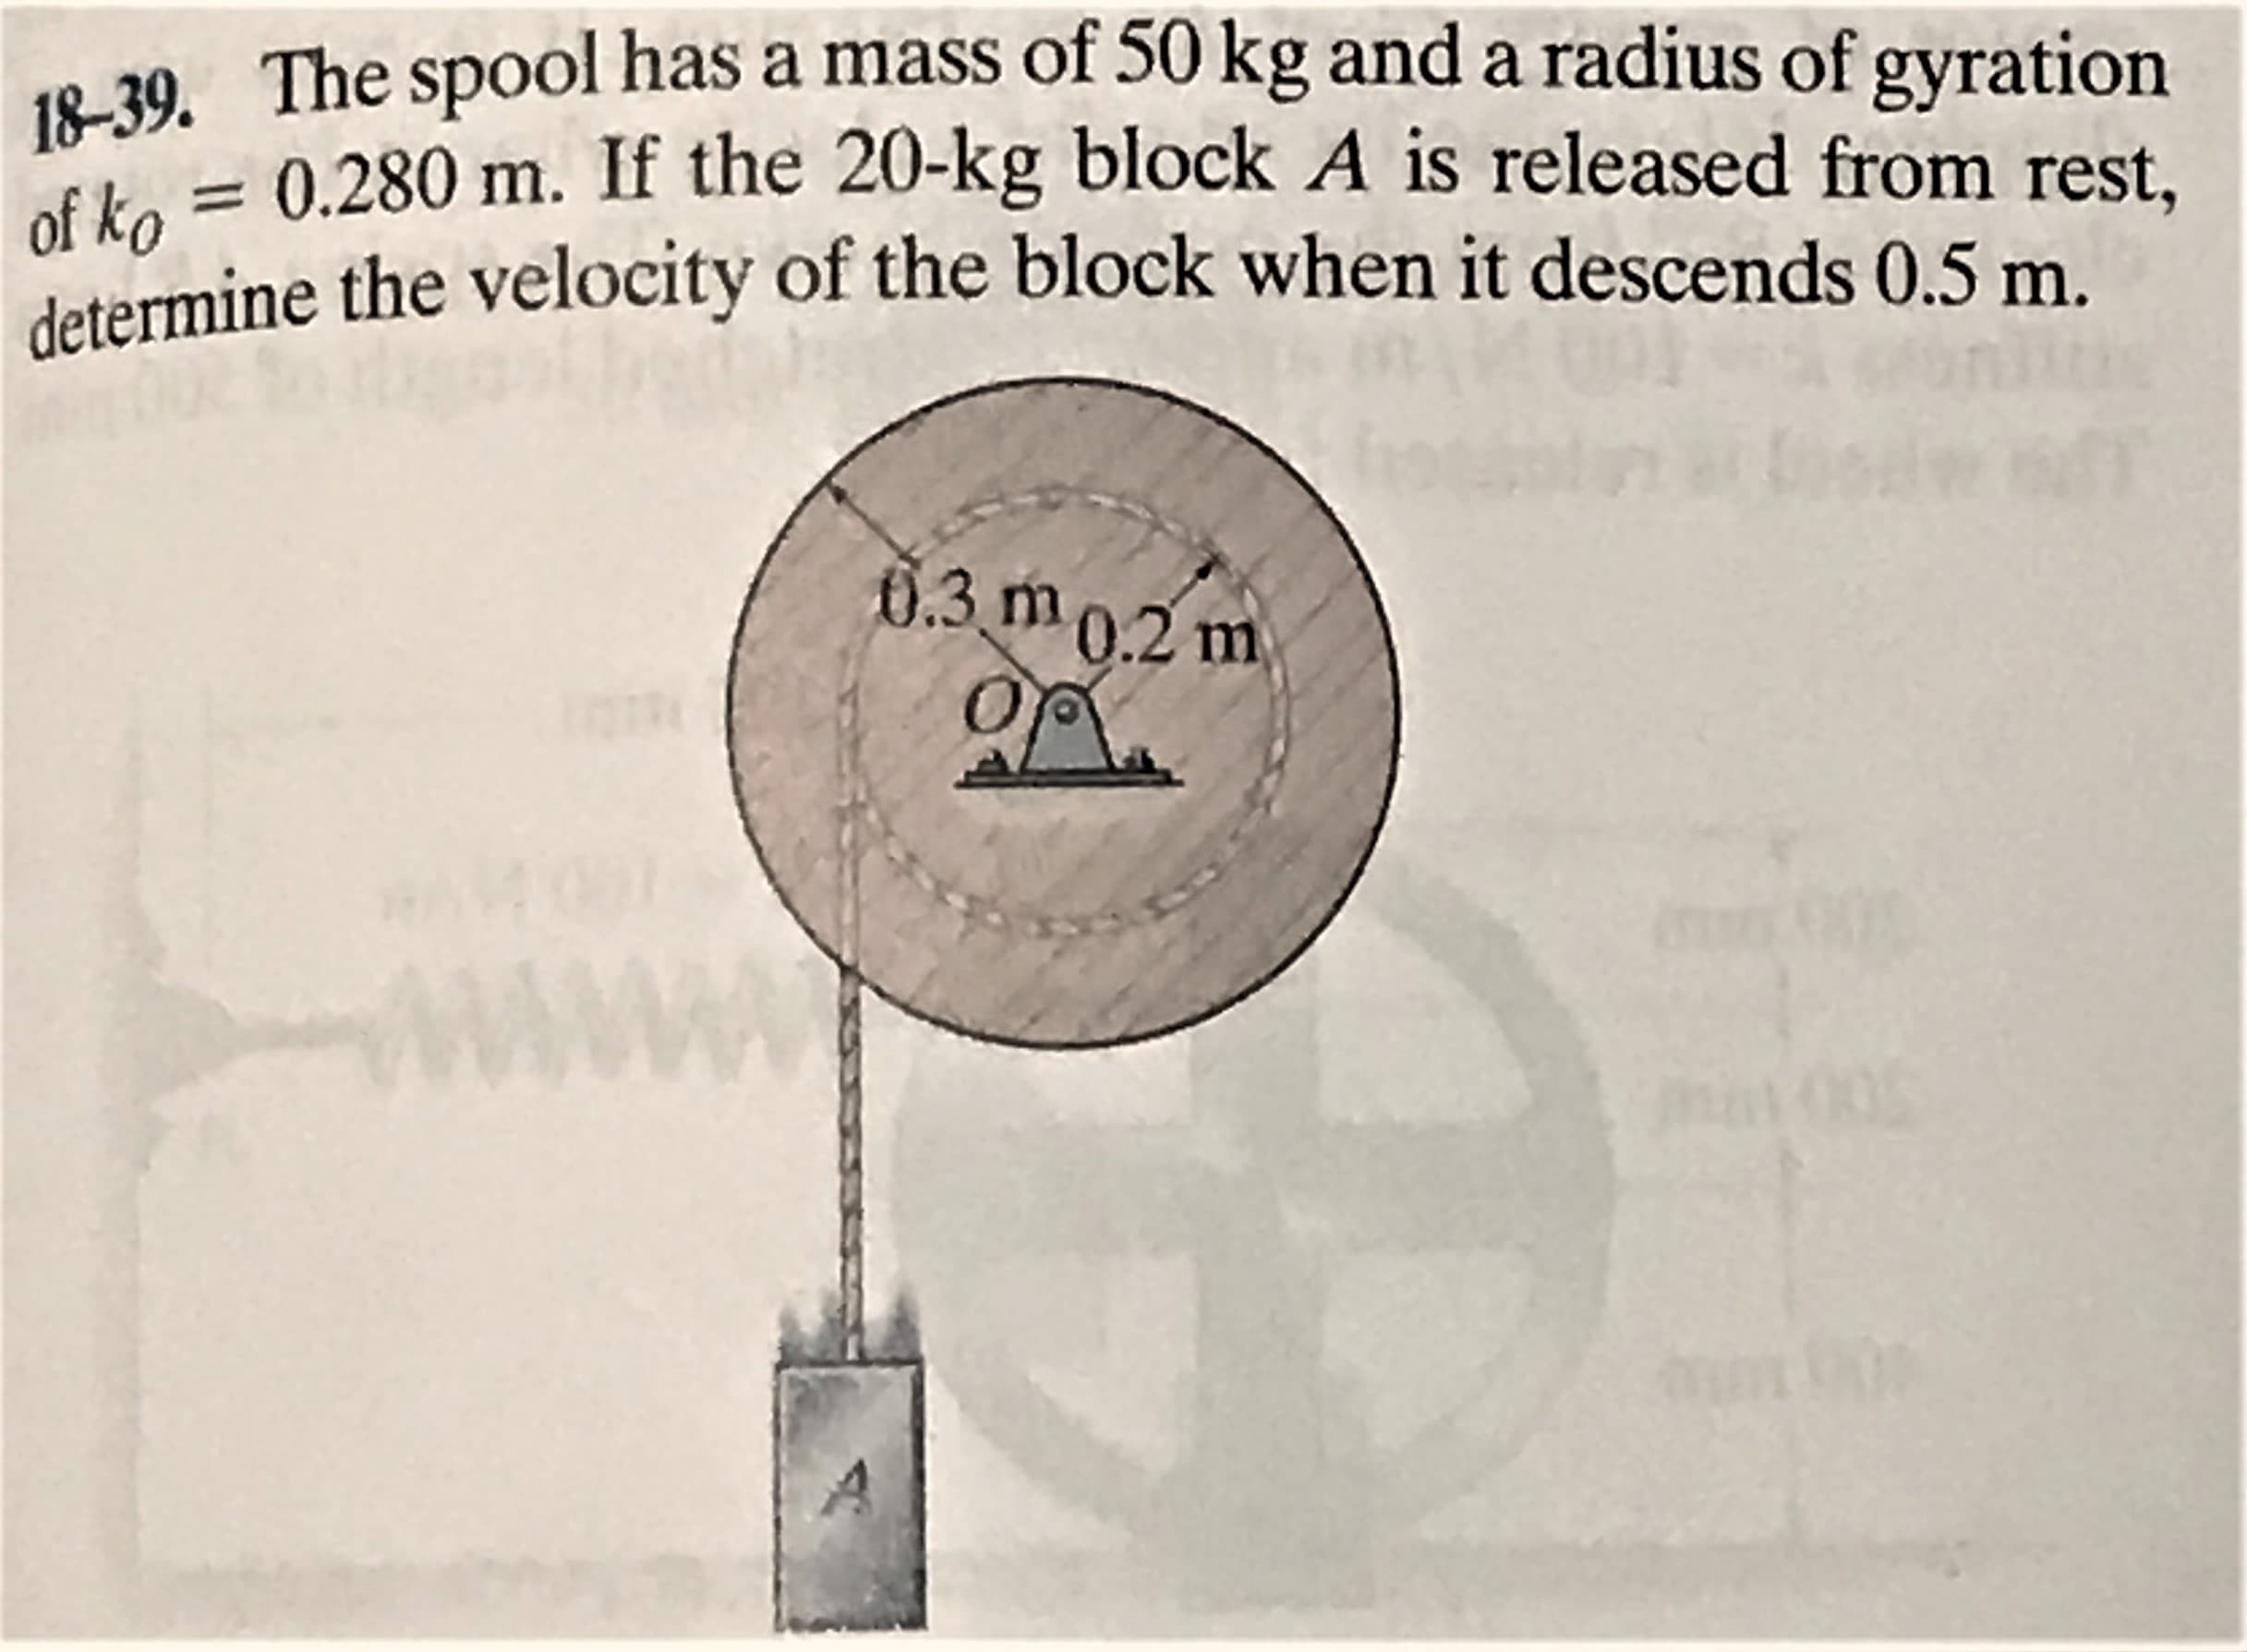 18-39. The spool has a mass of 50 kg and a radius of gyration
of ko = 0.280 m. If the 20-kg block A is released from rest.
determine the velocity of the block when it descends 0.5 m.
6.3 m0.2 m
